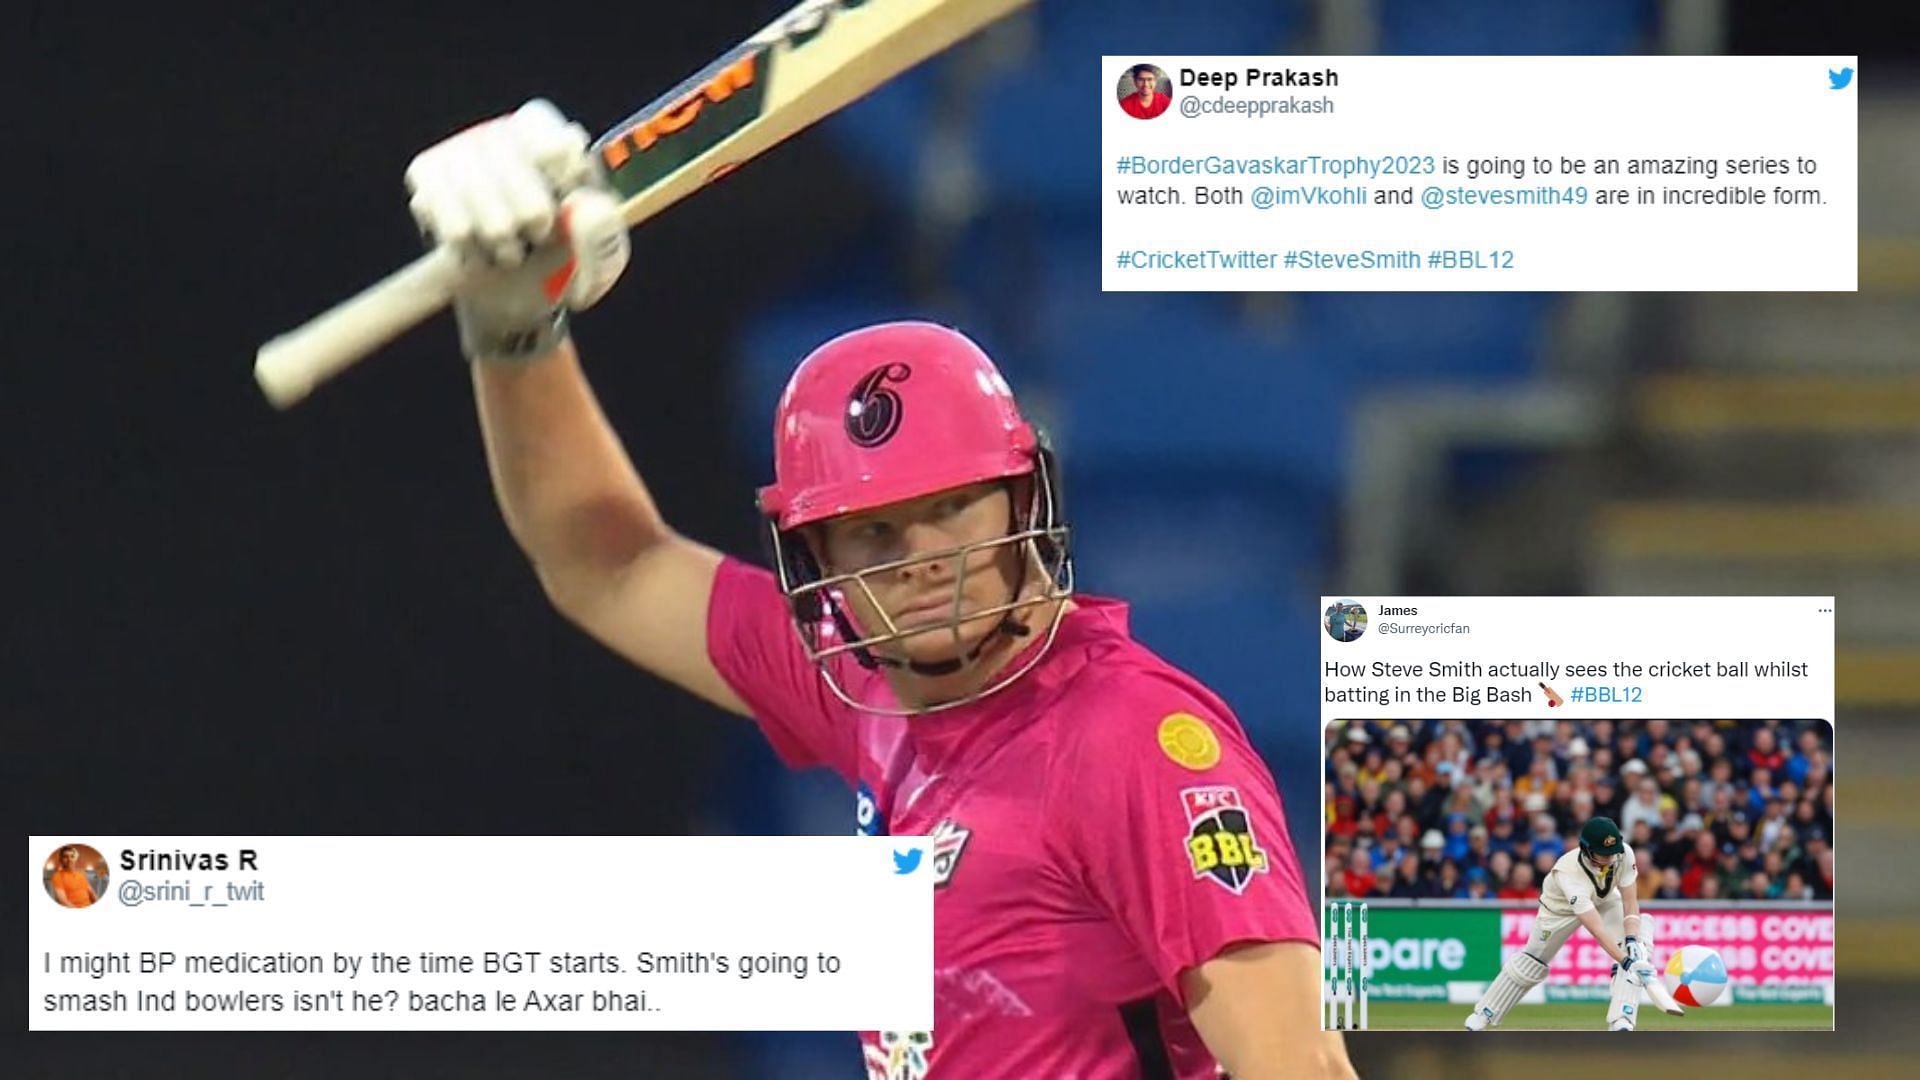 Fans were thrilled to see Steve Smith at his belligerent best in the BBL (P.C.:Twitter)